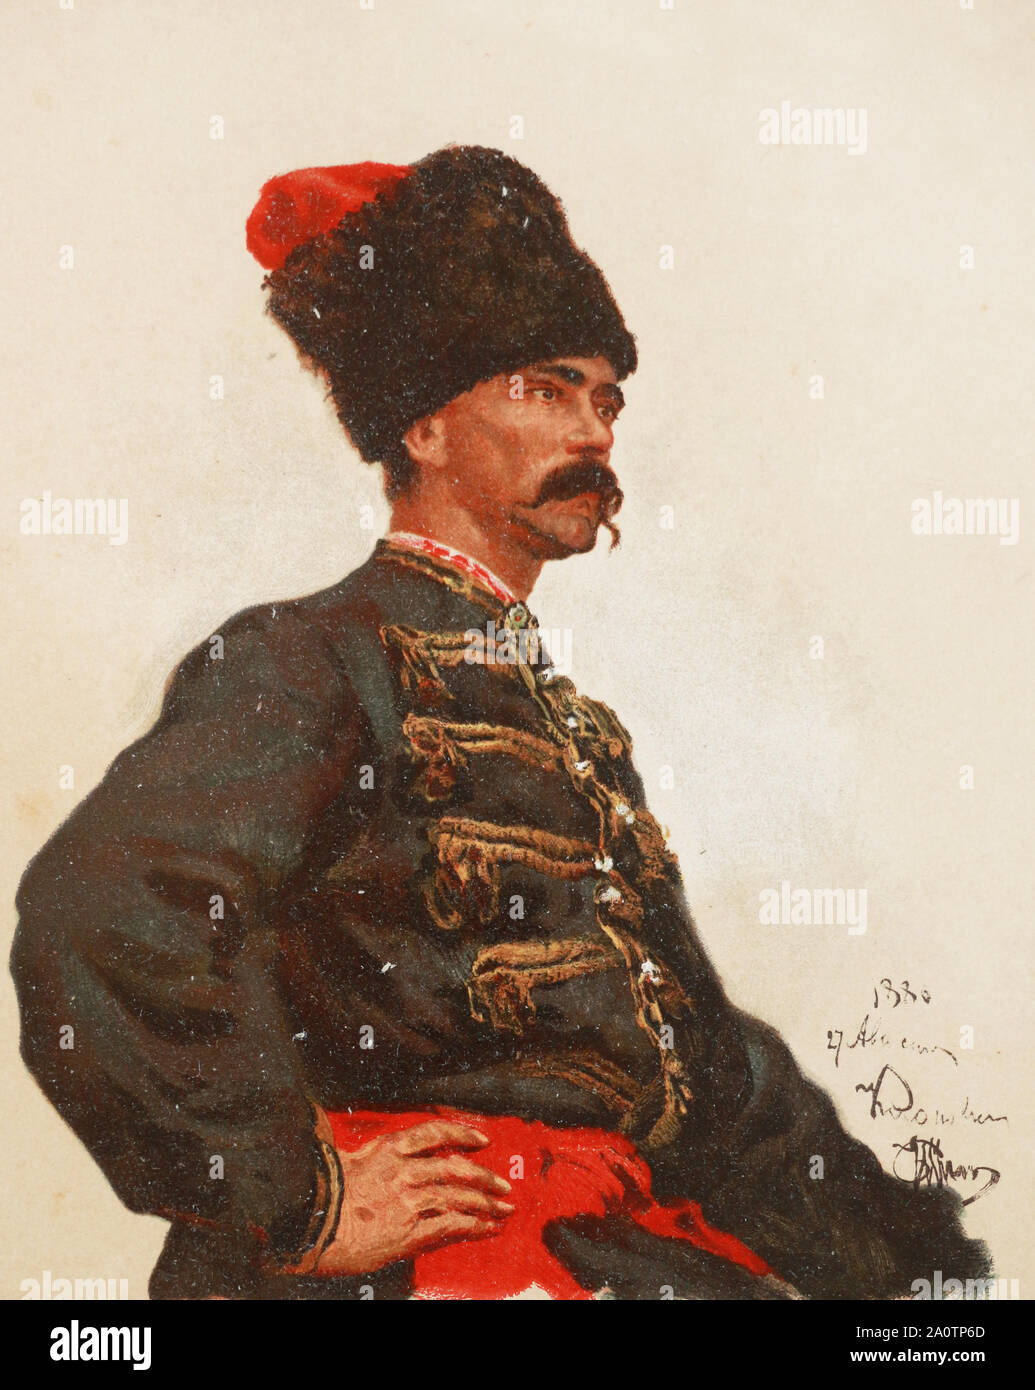 Etude of Cossack by Repin E.I. Lithography of the 19th century. Stock Photo